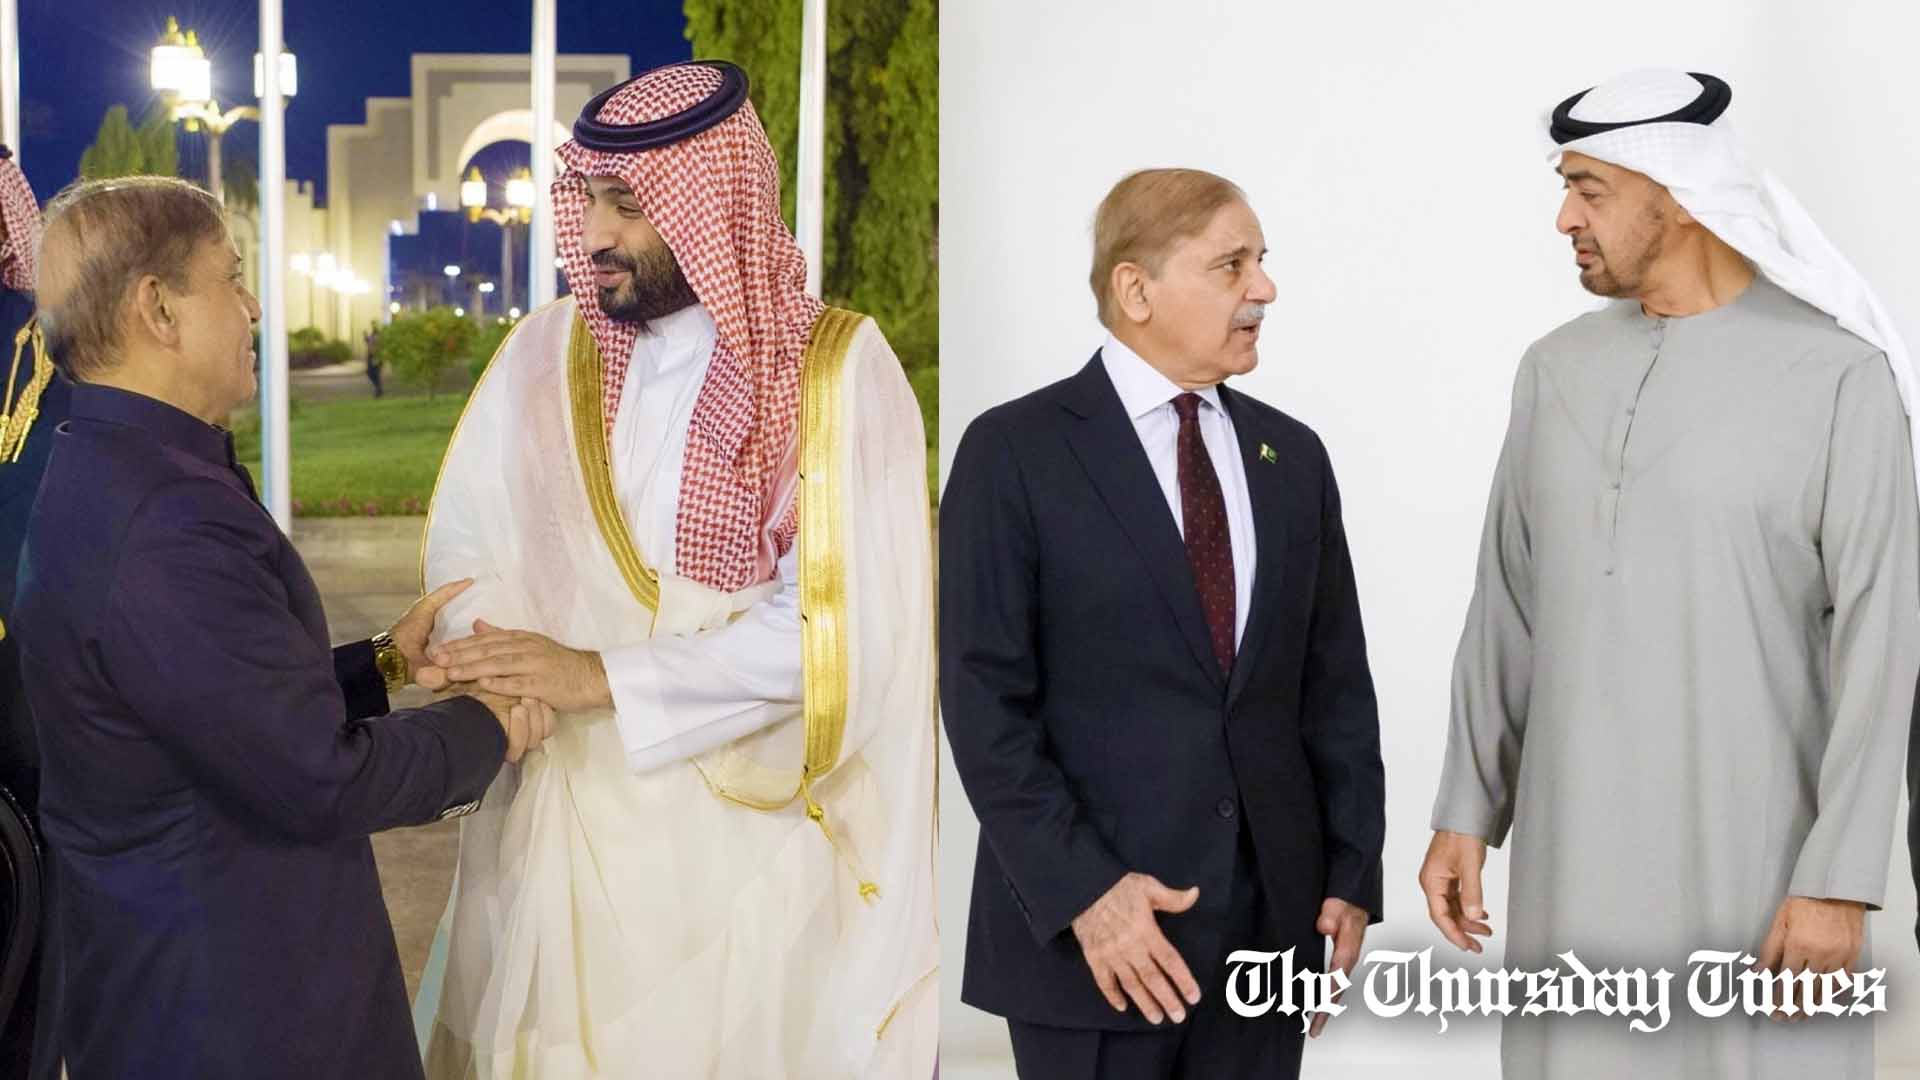 A combined file photo is shown of Prime Minister Shehbaz Sharif meeting with Saudi Crown Prince Mohammed bin Salman (L) and UAE president Mohamed bin Zayed Al Nahyan (R). — ROYAL COURT OF SAUDI ARABIA/UAE PRESIDENTIAL COURT/THE THURSDAY TIMES